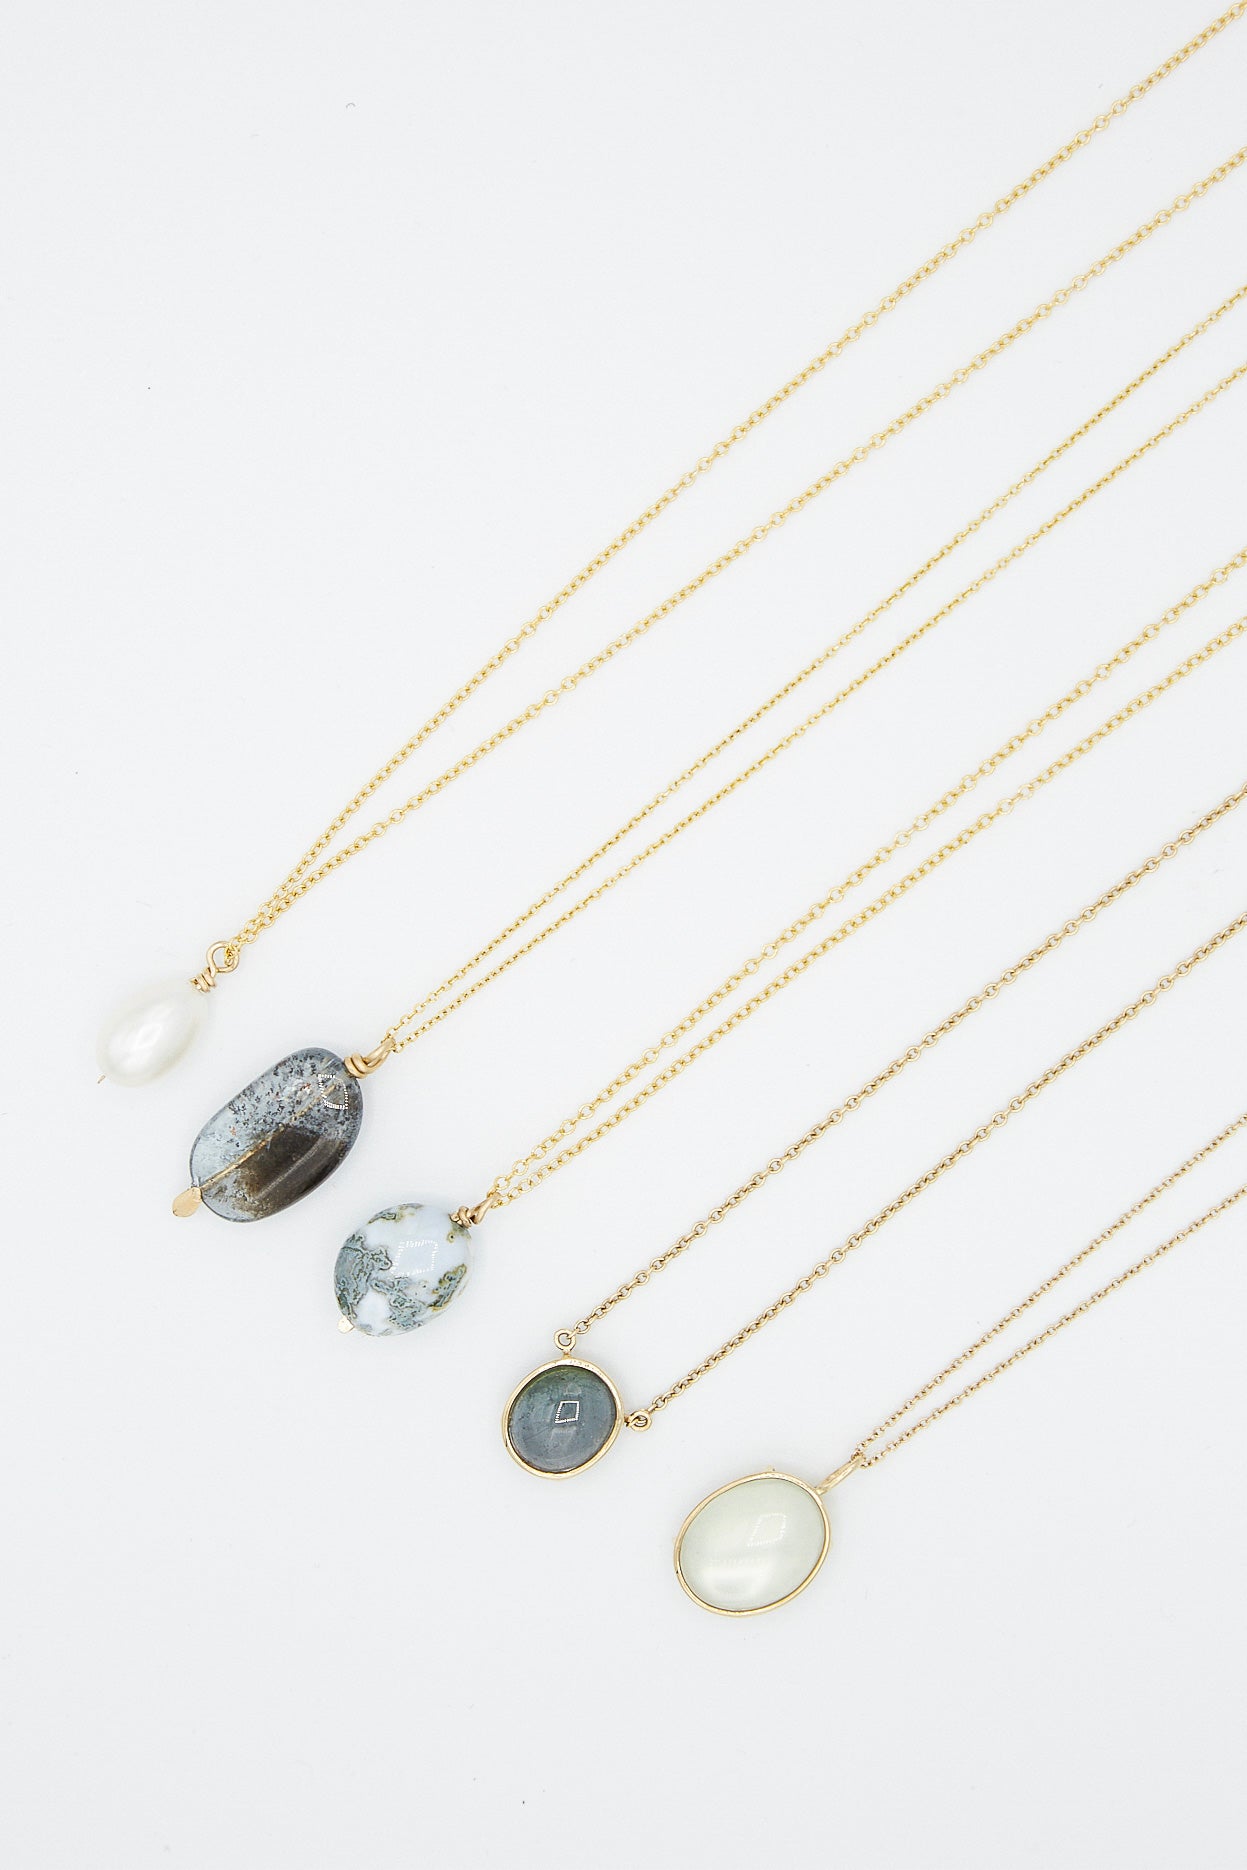 A group of Mary MacGill 14K Floating Necklaces in Ceylon Moonstone stones and pearls on a white background.